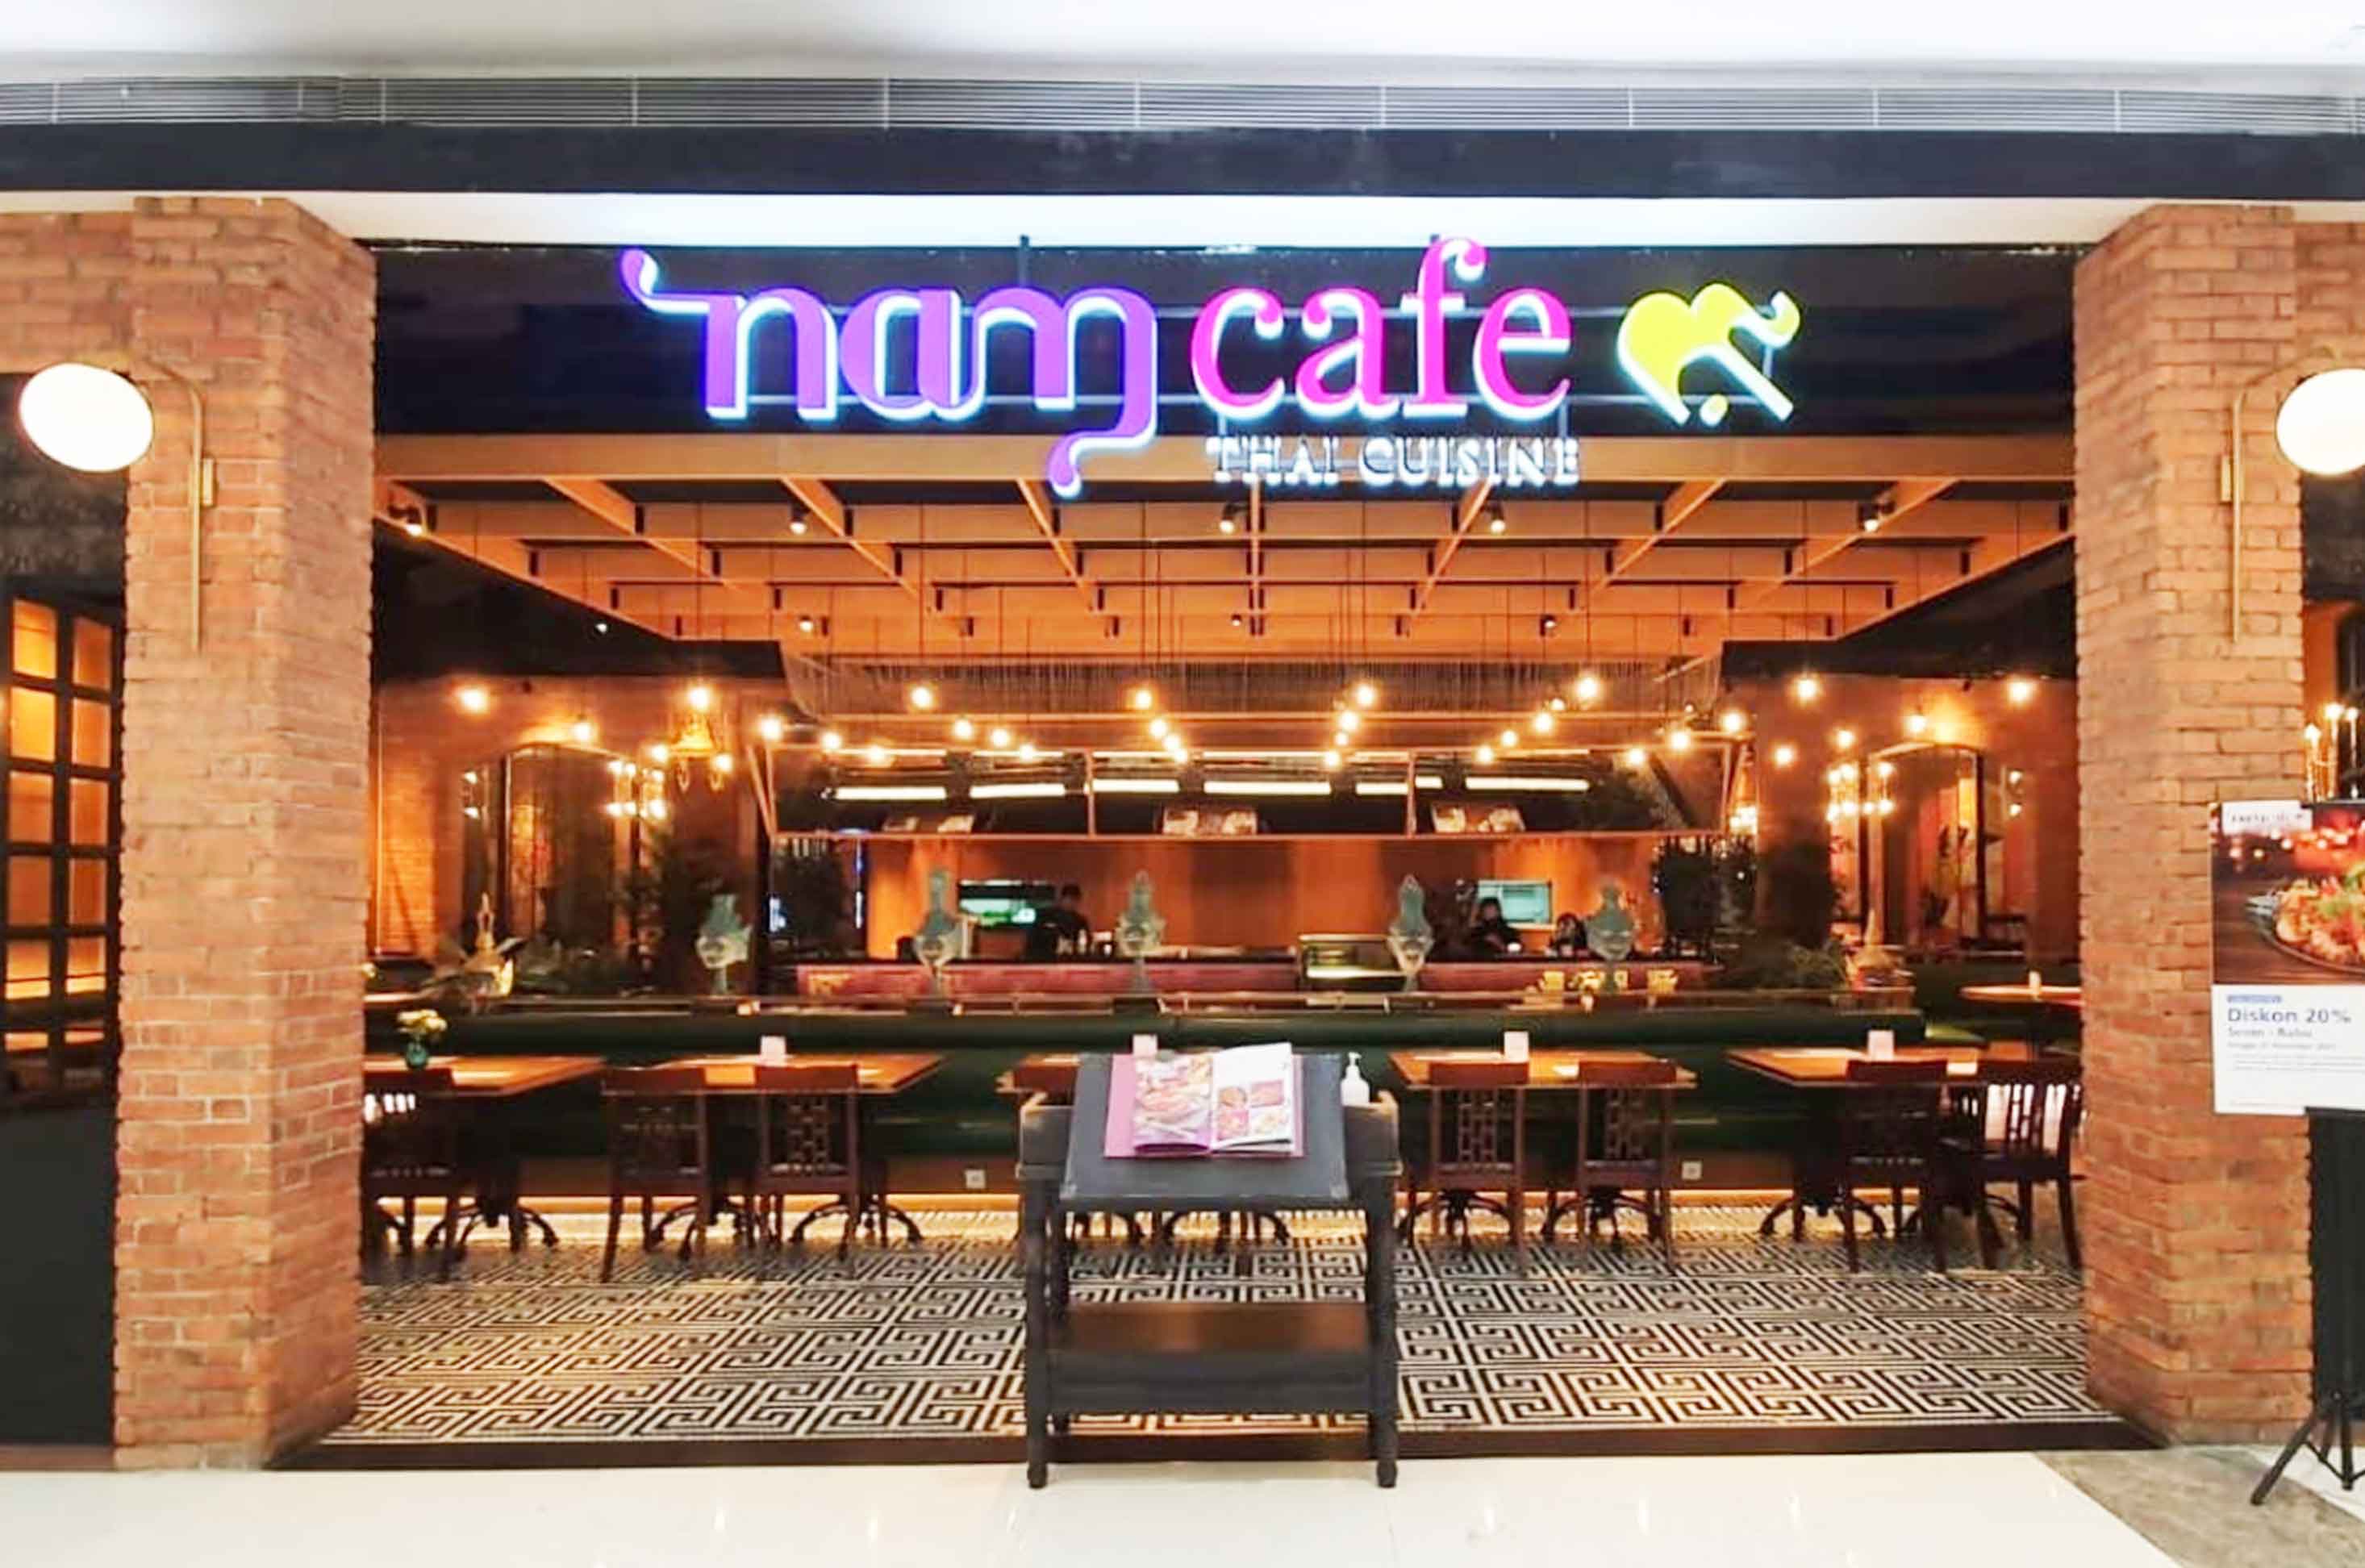 Nam Cafe shop front in lippo mall puri st. moritz